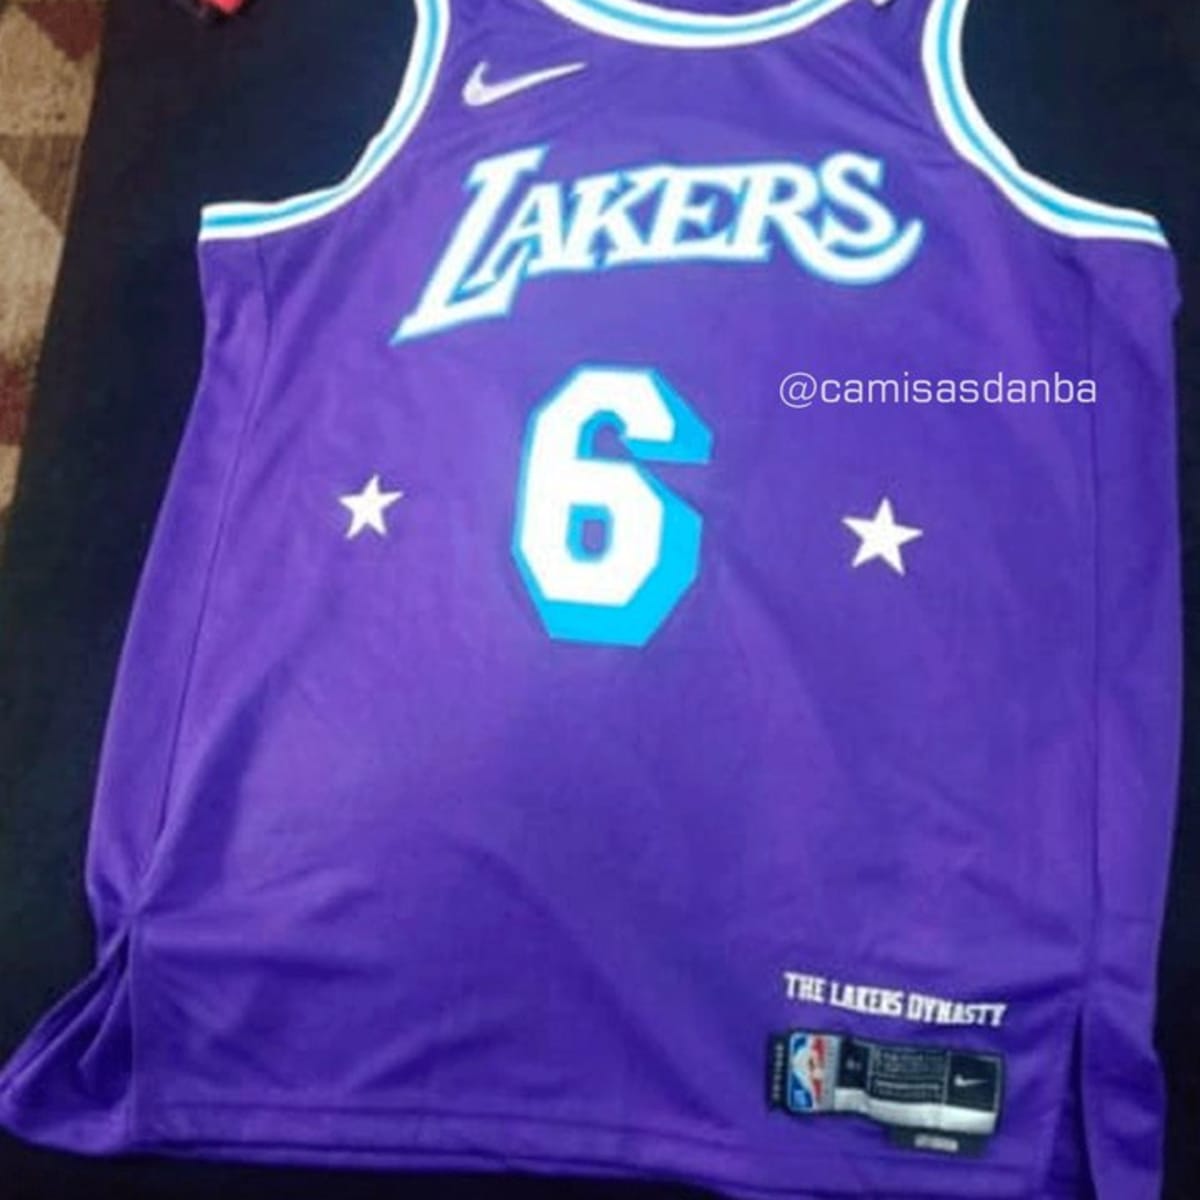 Lakers News: 2021-2022 Nike City Jerseys Have Leaked Online - All Lakers |  News, Rumors, Videos, Schedule, Roster, Salaries And More